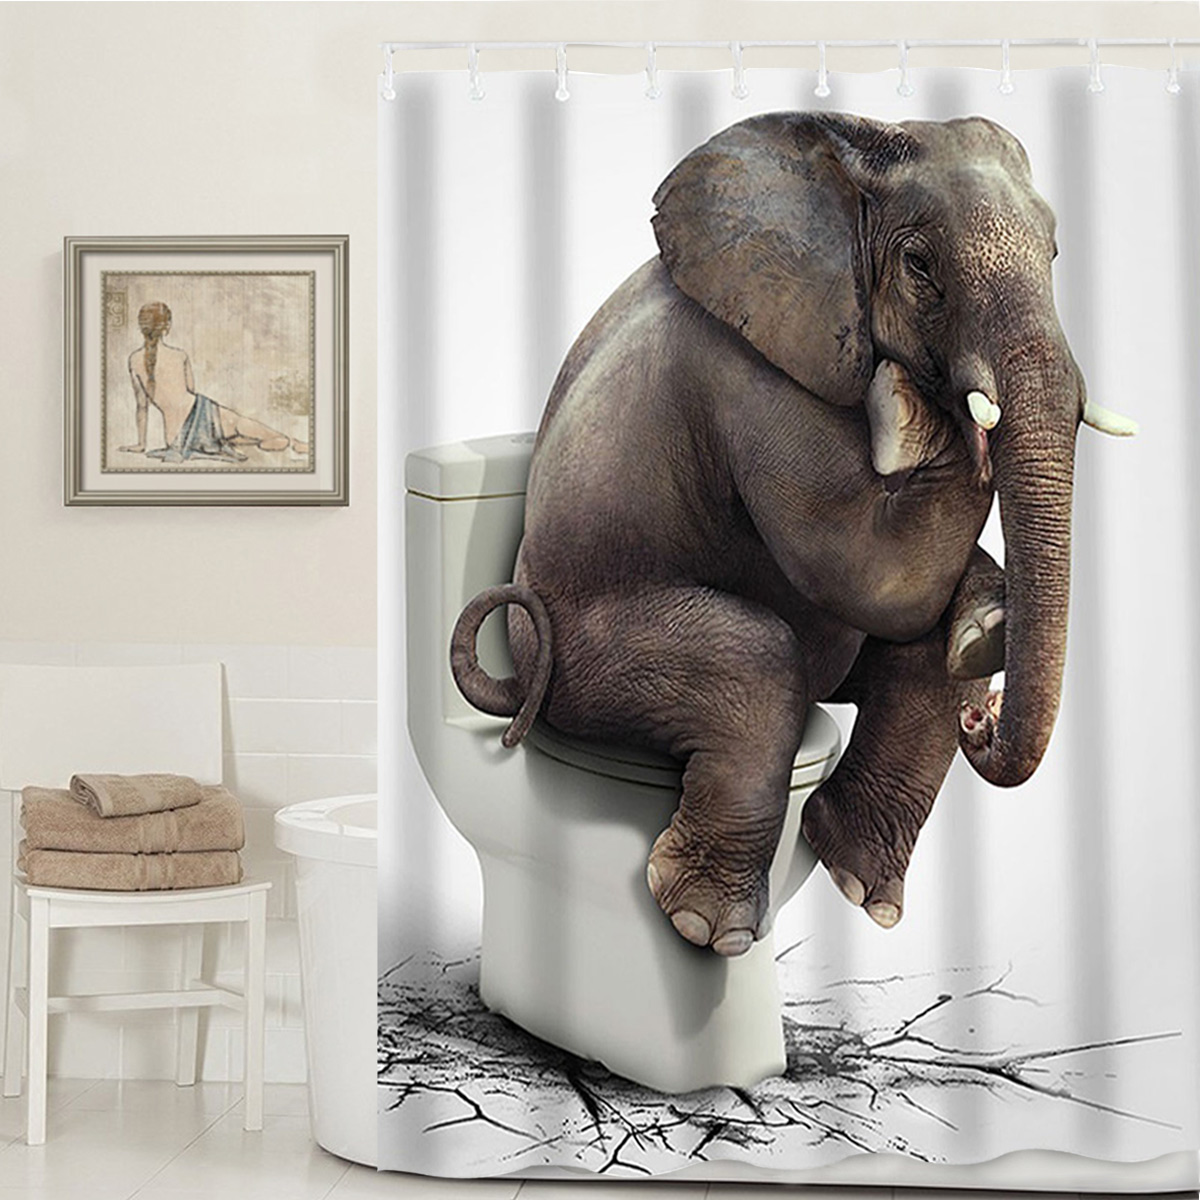 Waterproof 71"x71" Elephant Shower Curtain Bathroom Set Fabric Polyester + 12 Hooks Rings Home Decor Christmas Gift - image 5 of 5